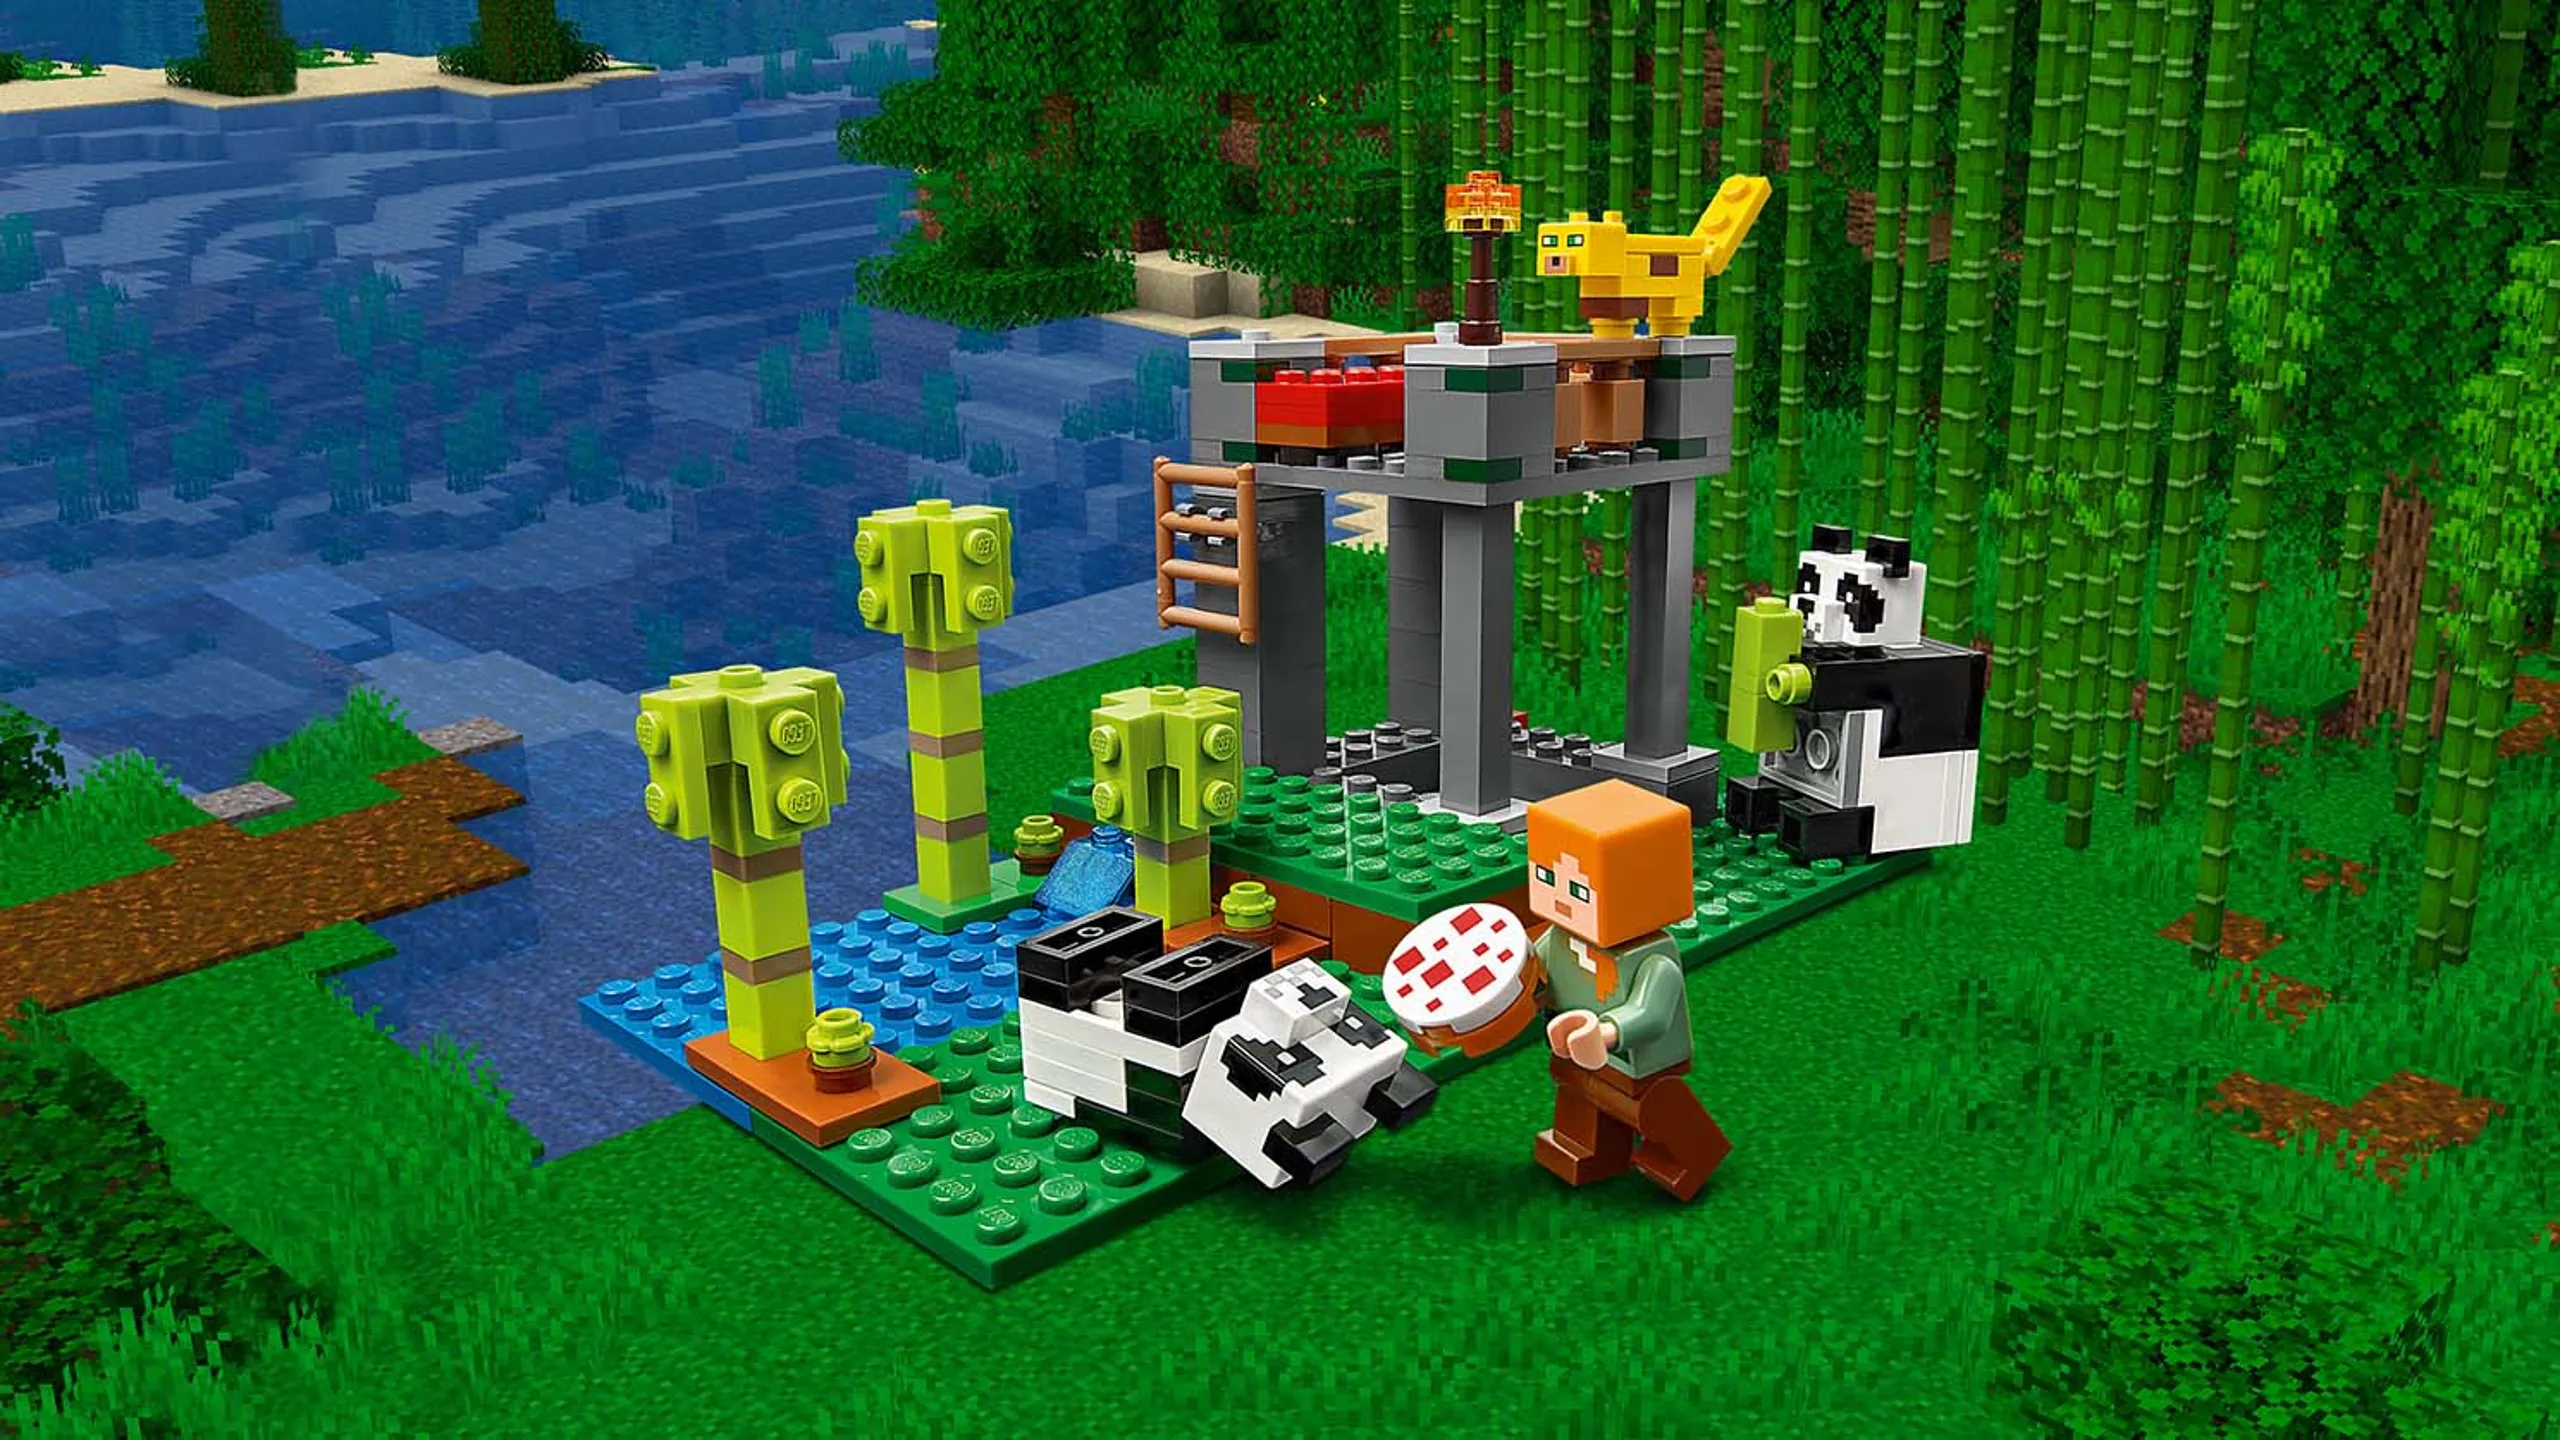 Lego to launch Minecraft sets, Games